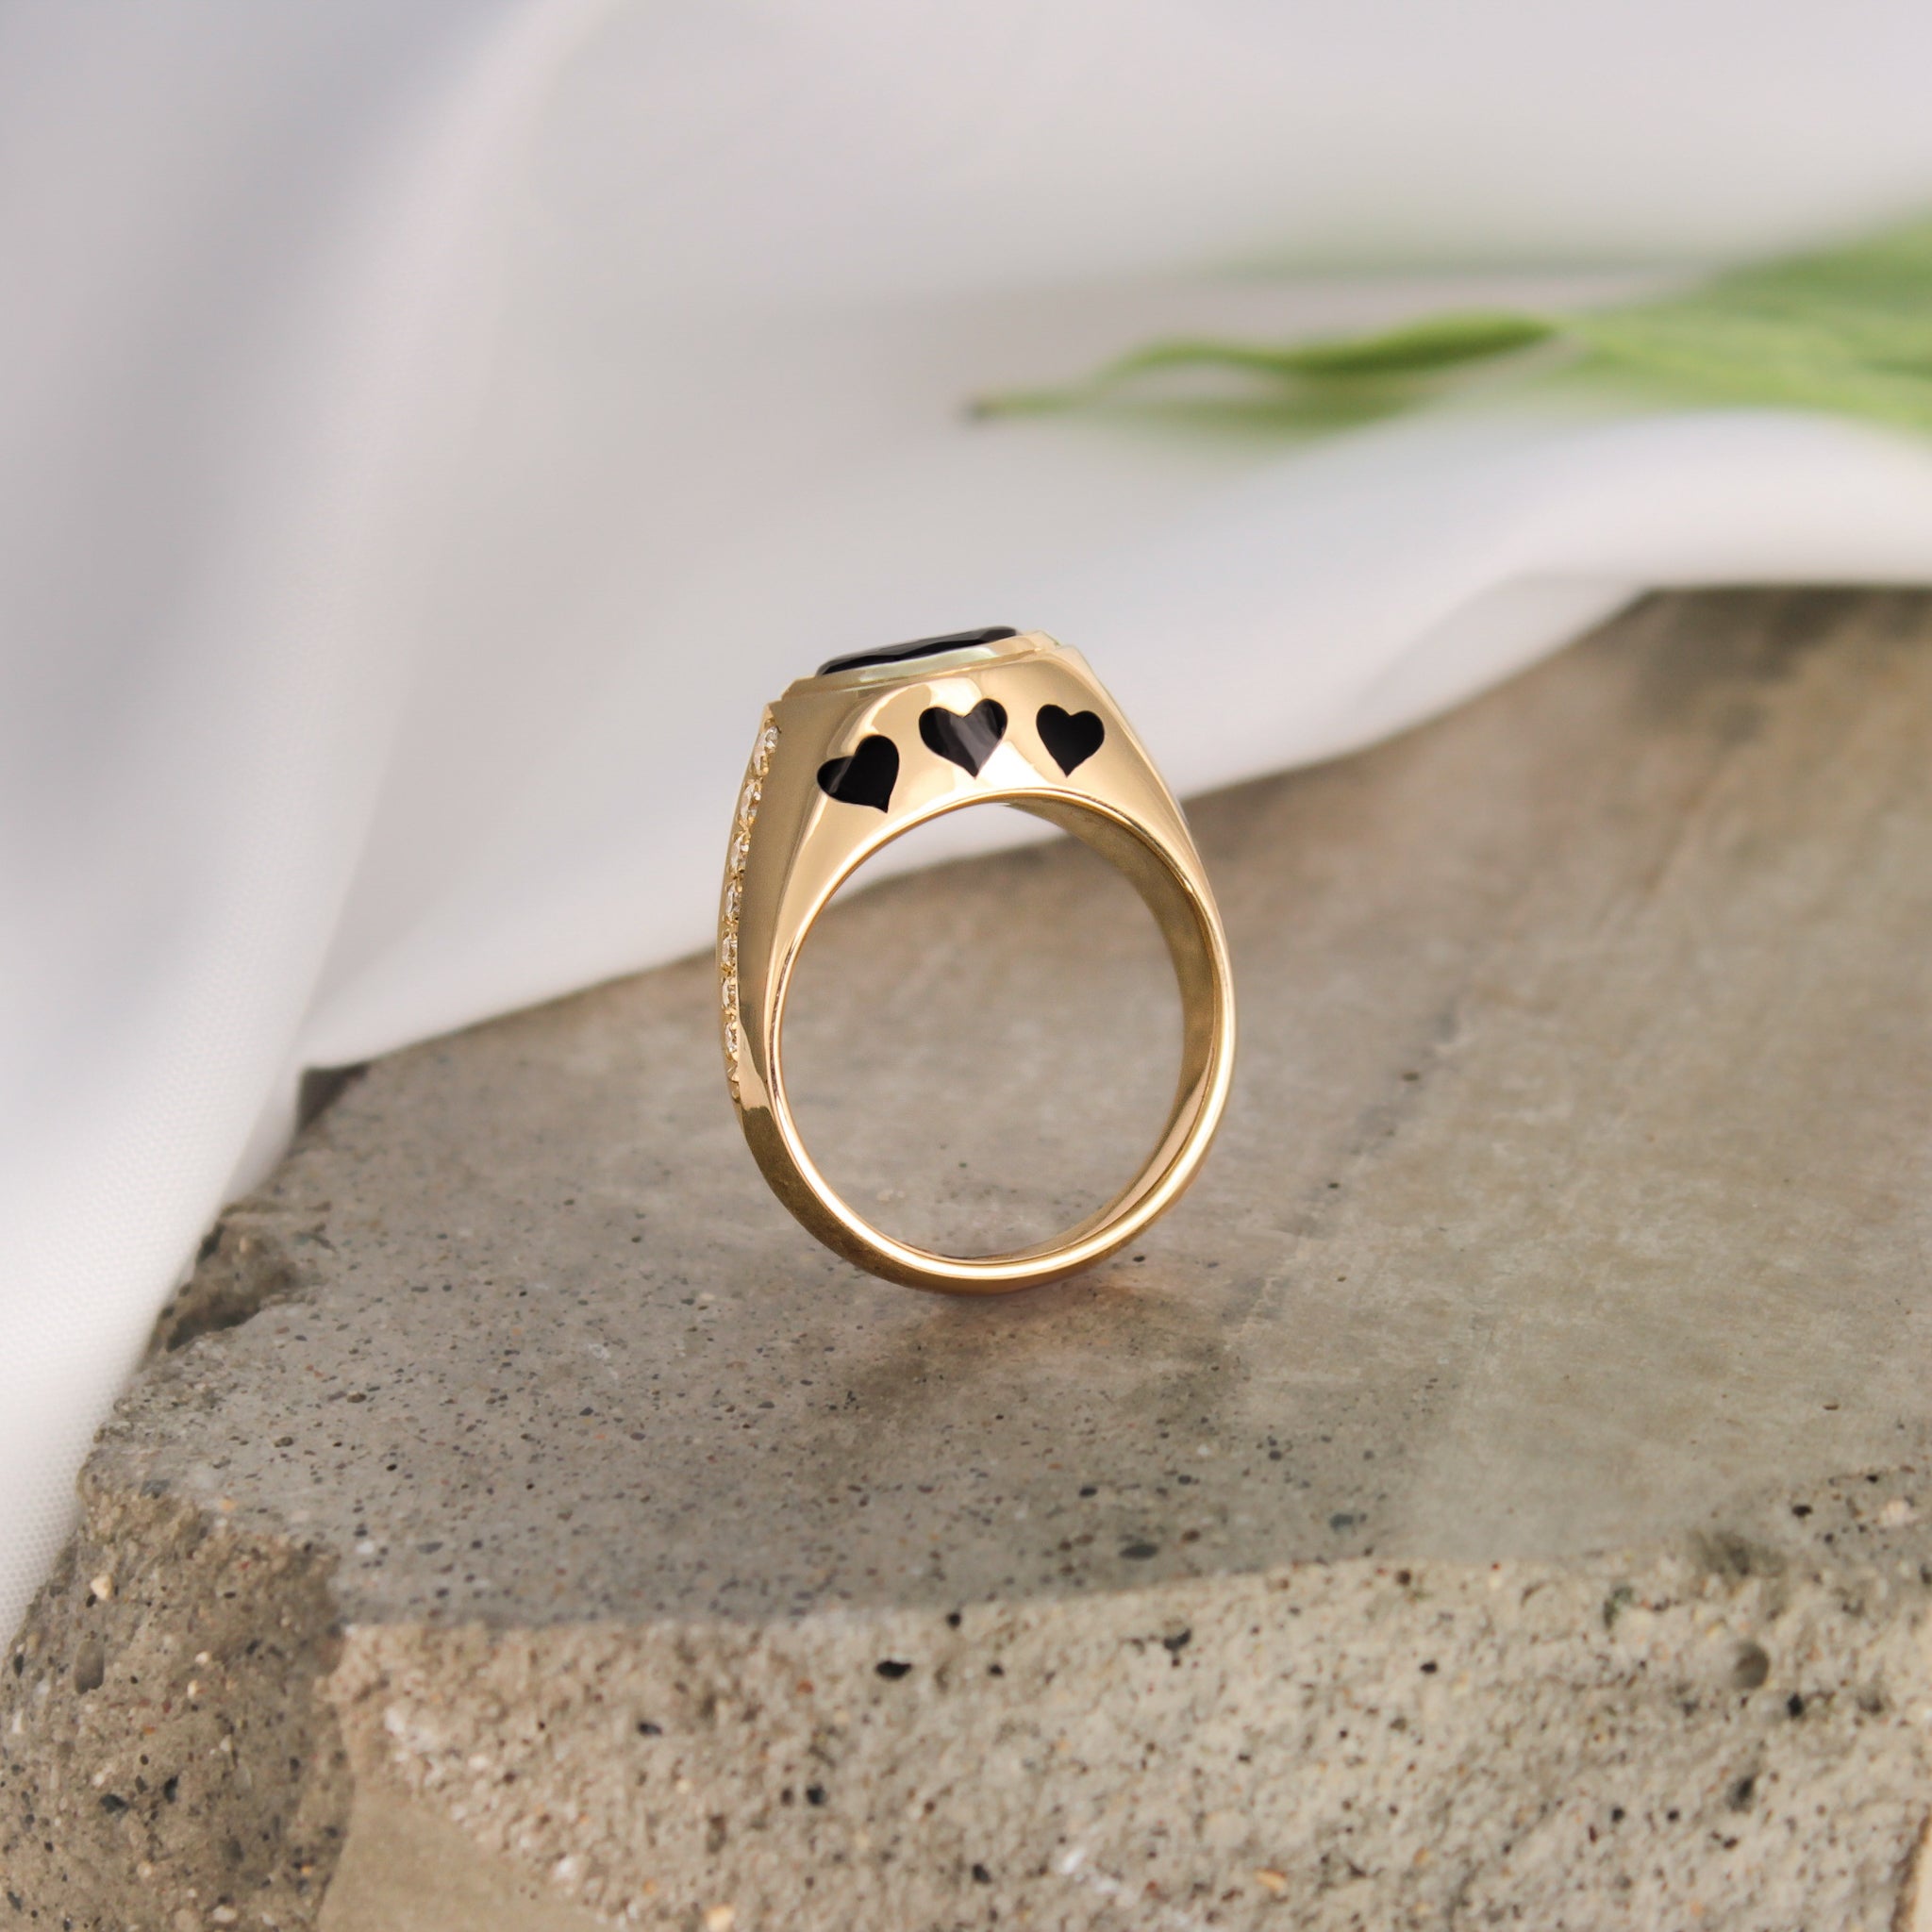 14k Yellow Gold ring with black enamel hearts and accent diamonds."